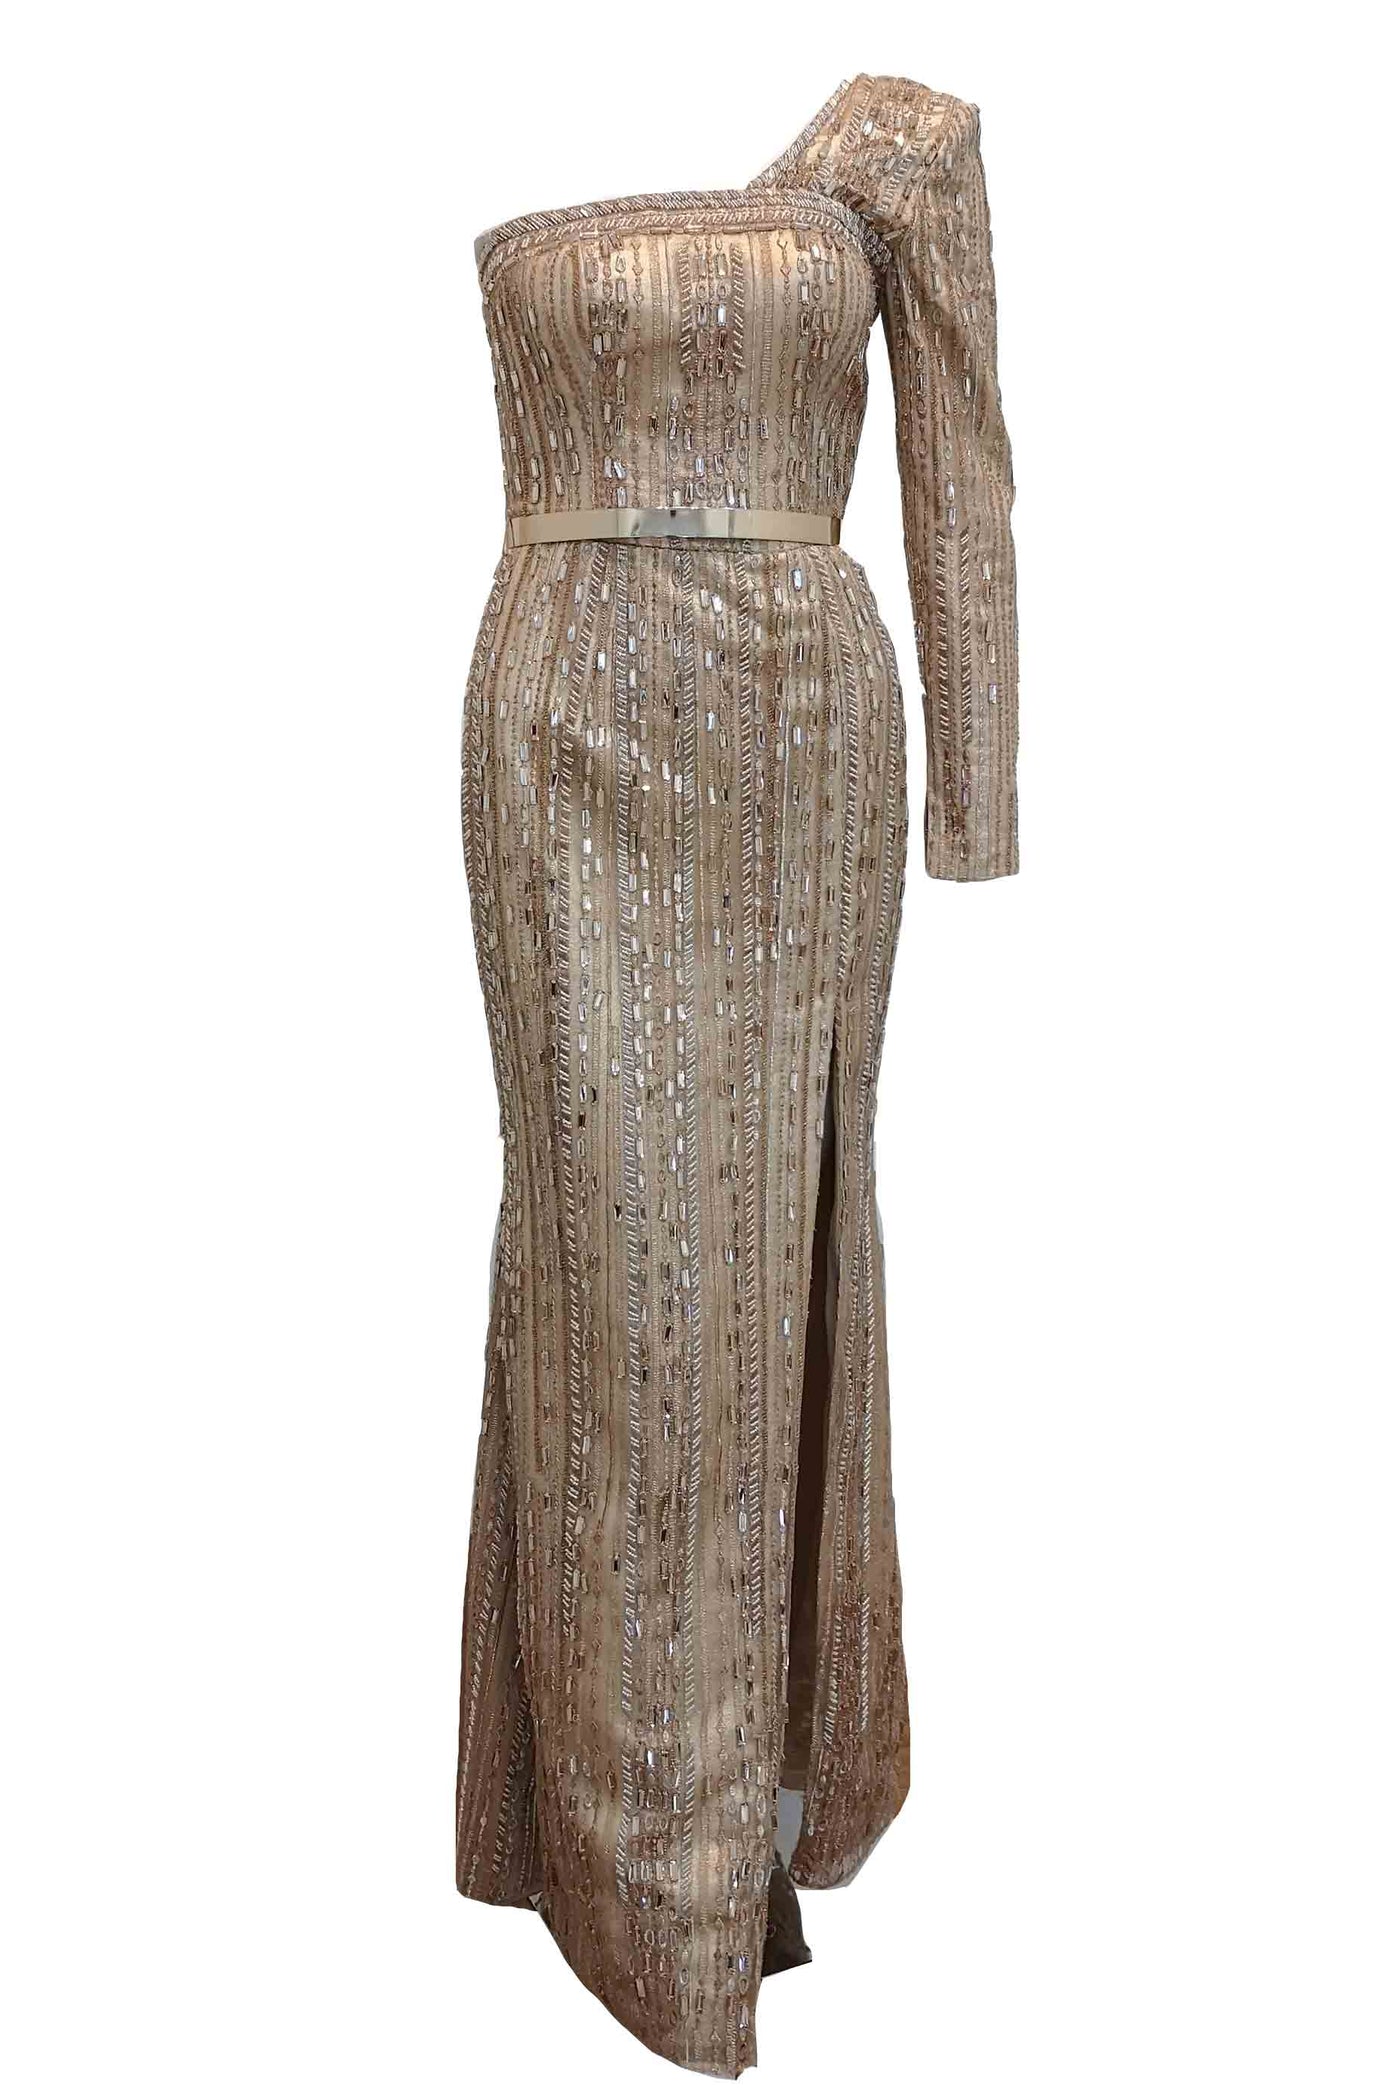 Rent: Anrini Polim - One Sleeves Fully Beaded Dress With Slit